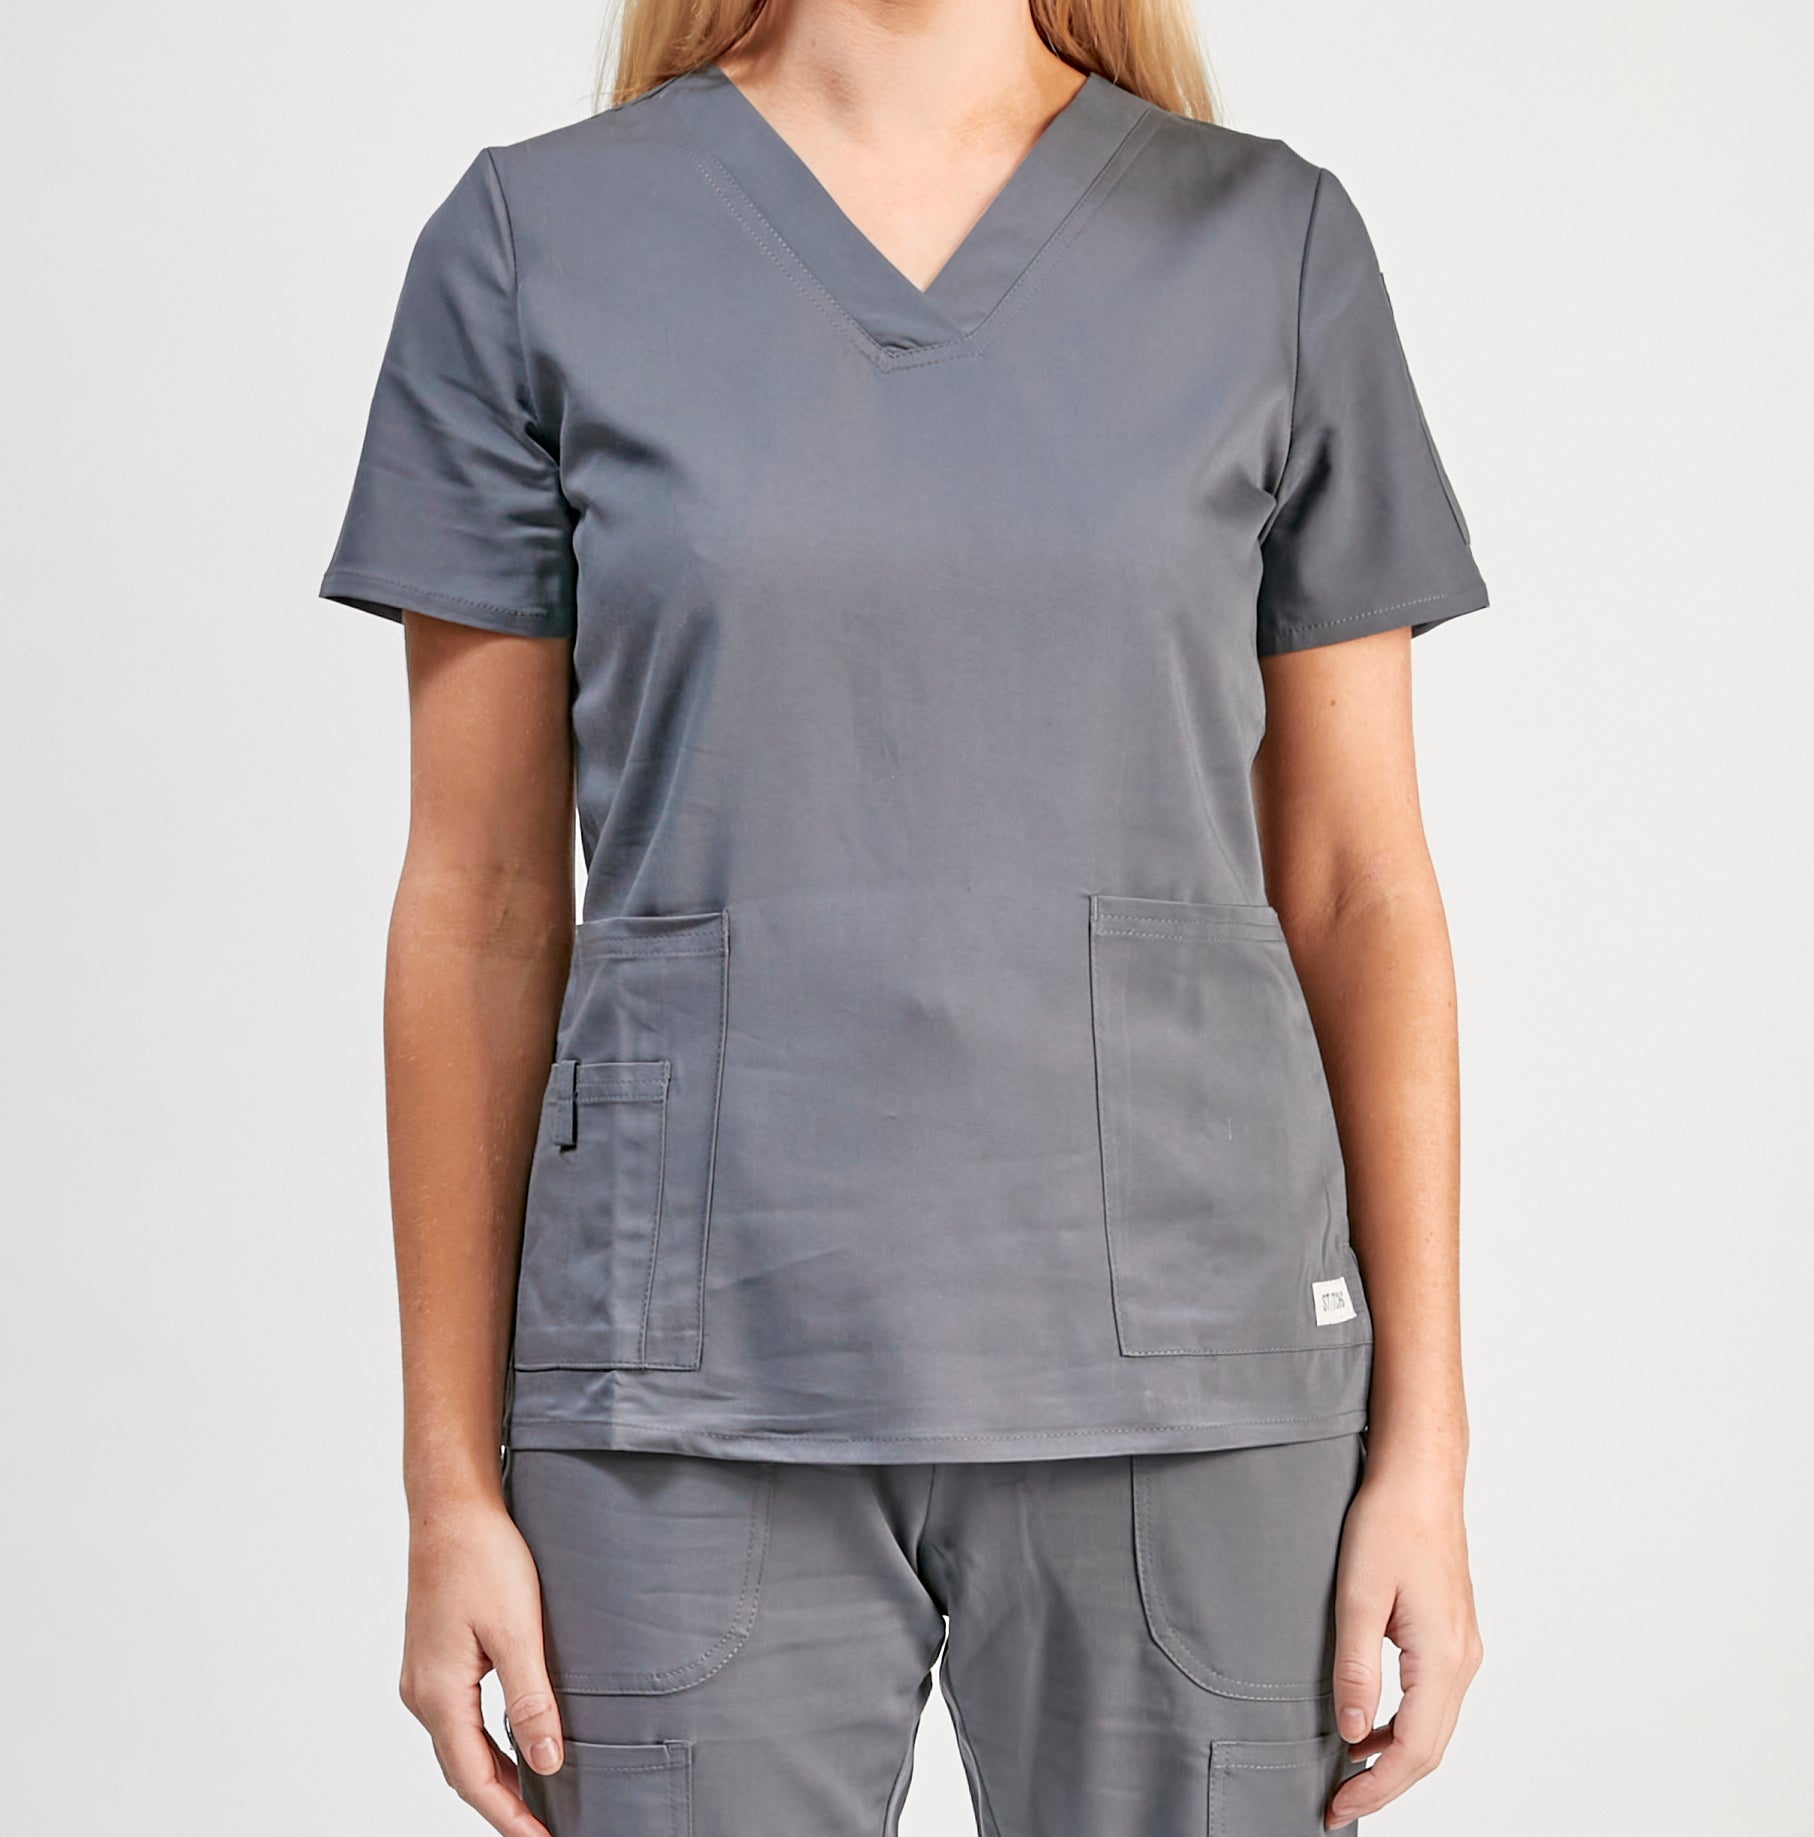 Uniforme clinico mujer one gris